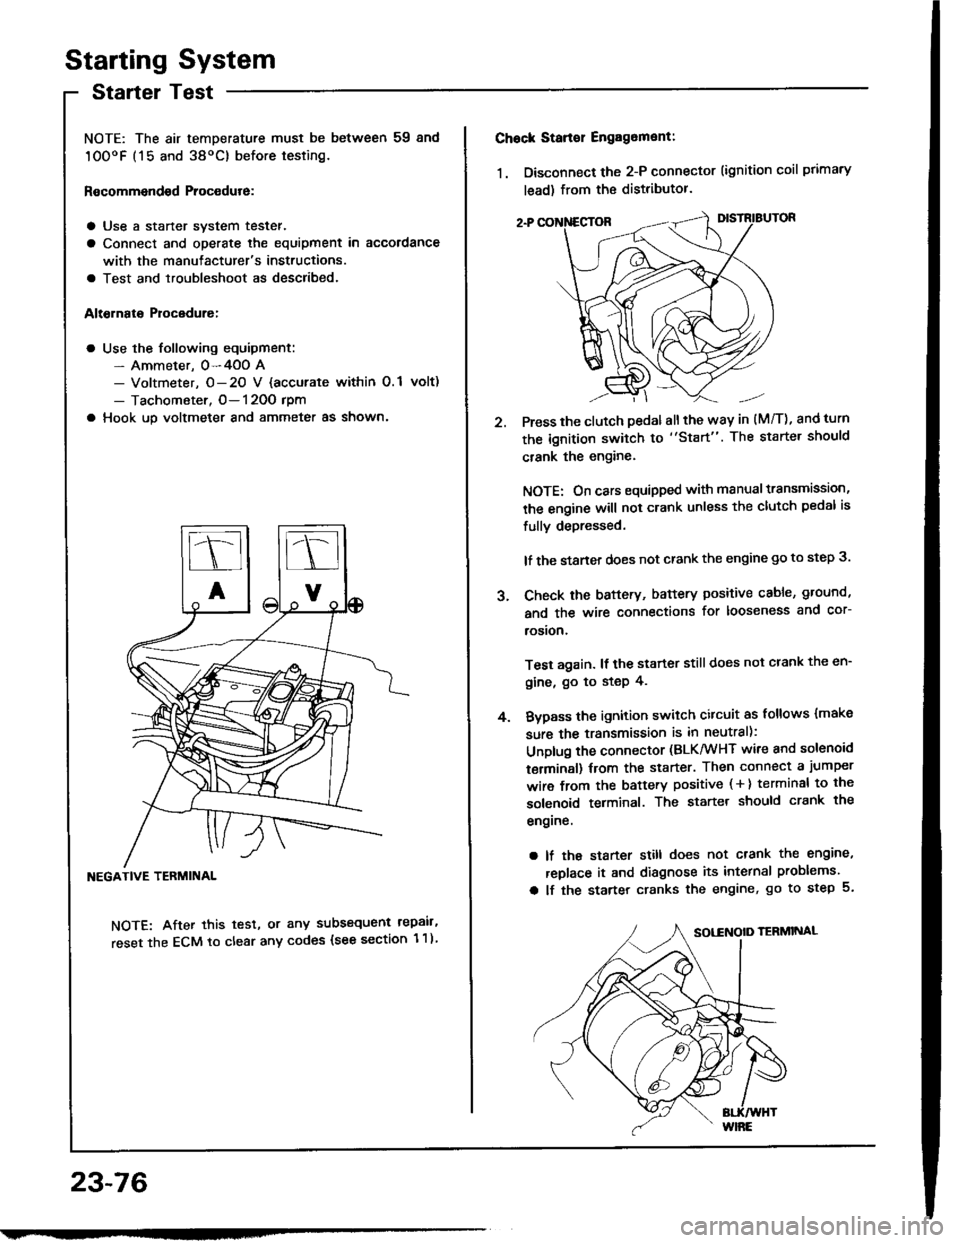 ACURA INTEGRA 1994  Service Service Manual Starting System
Startel Test
NOTE: The air temDerature must be between 59 8nd
10OoF (15 and 38oC) before testing.
Recommendsd Procodure:
a Use a staner svstem tester.
a Connect and operate the equipme